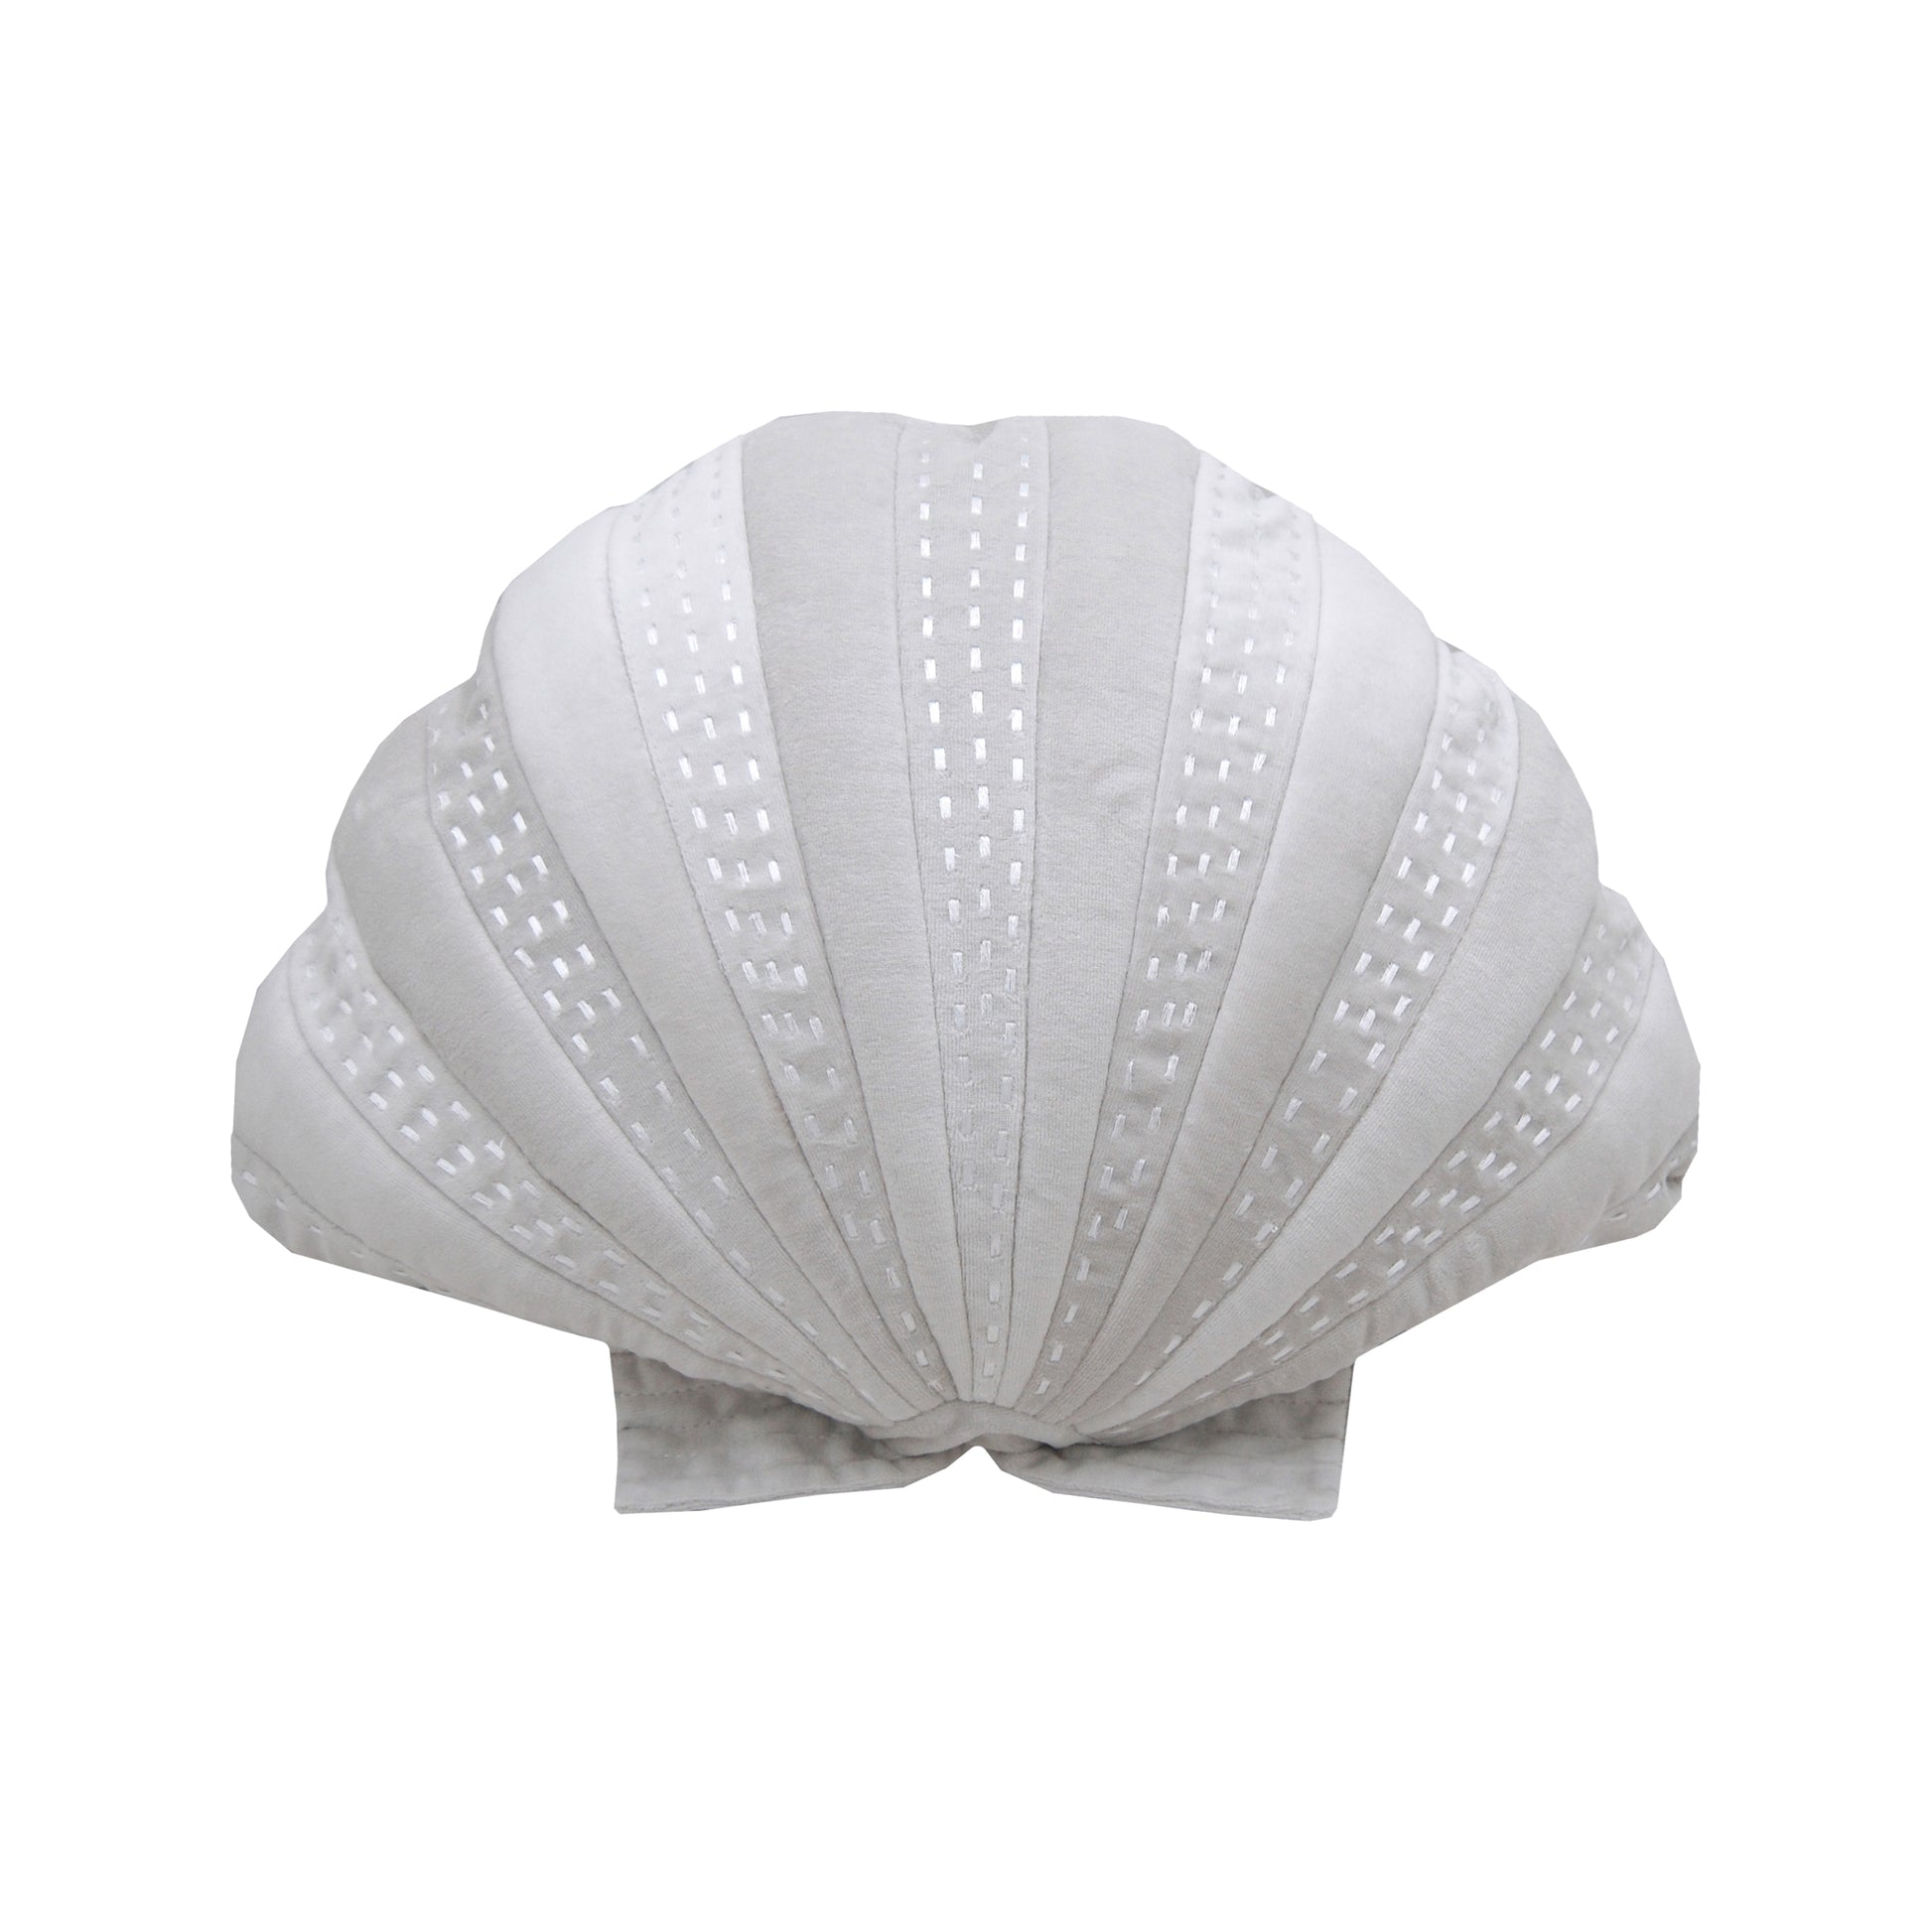 Scallop shaped velvet pillow with white embroidery details.